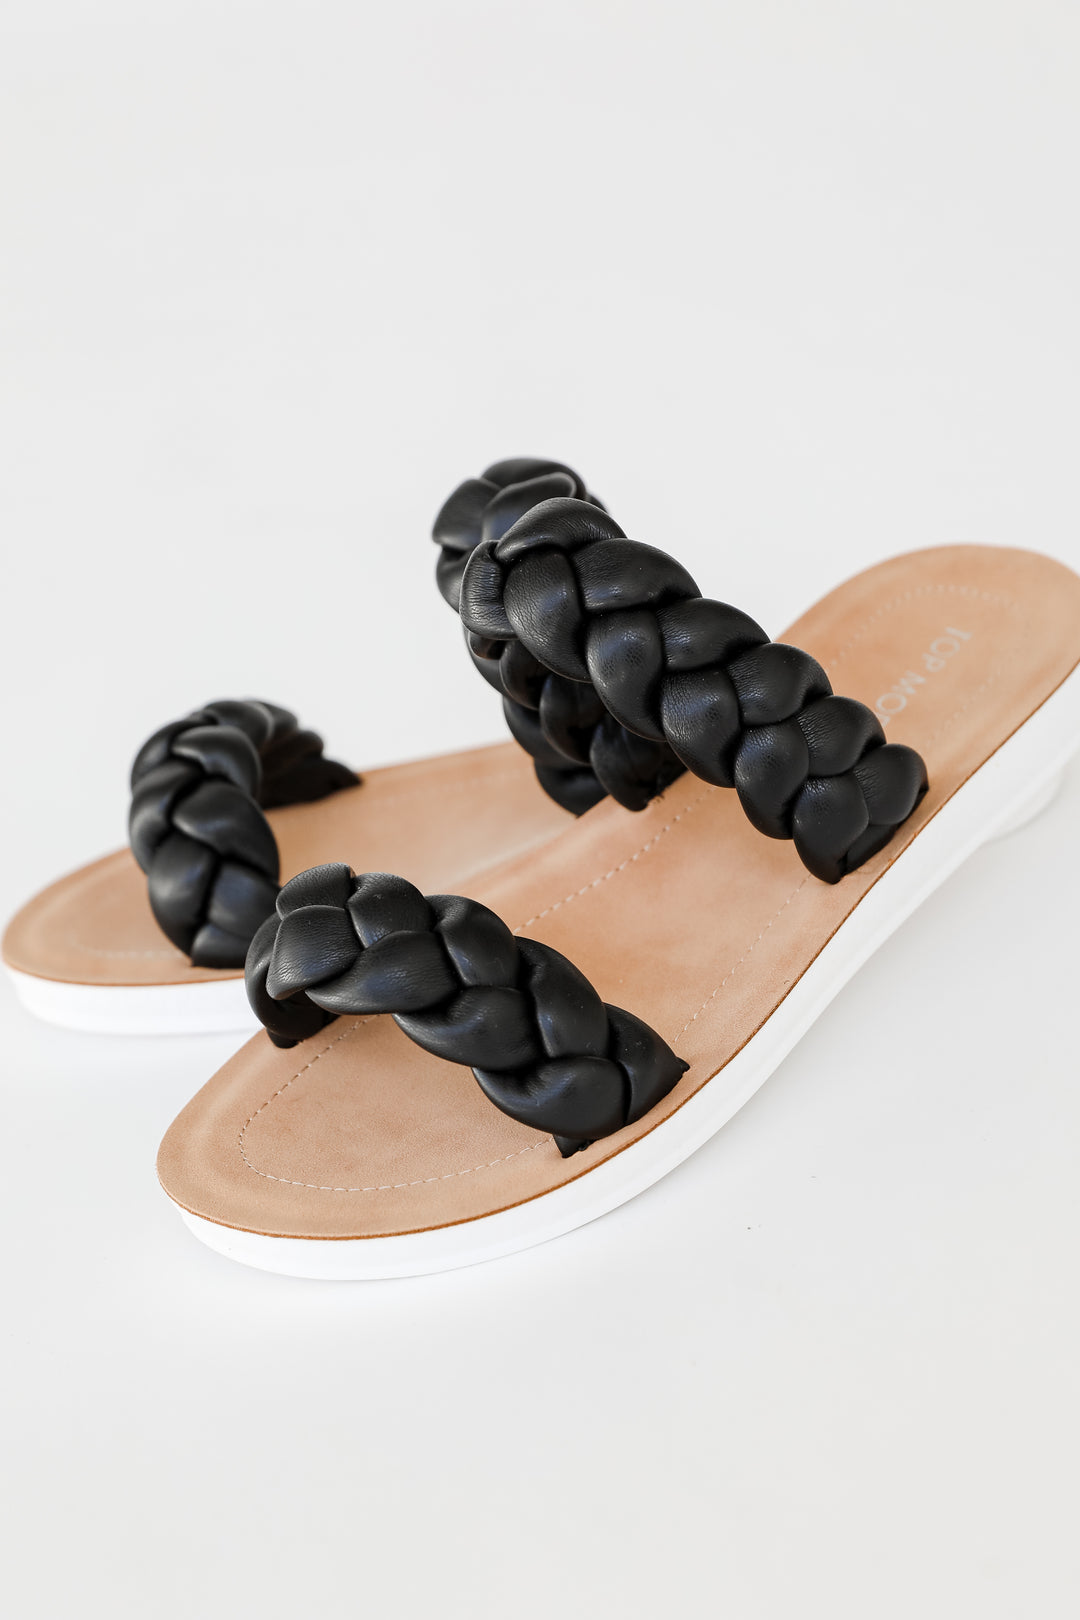 Braided Double Strap Sandals in black flat lay